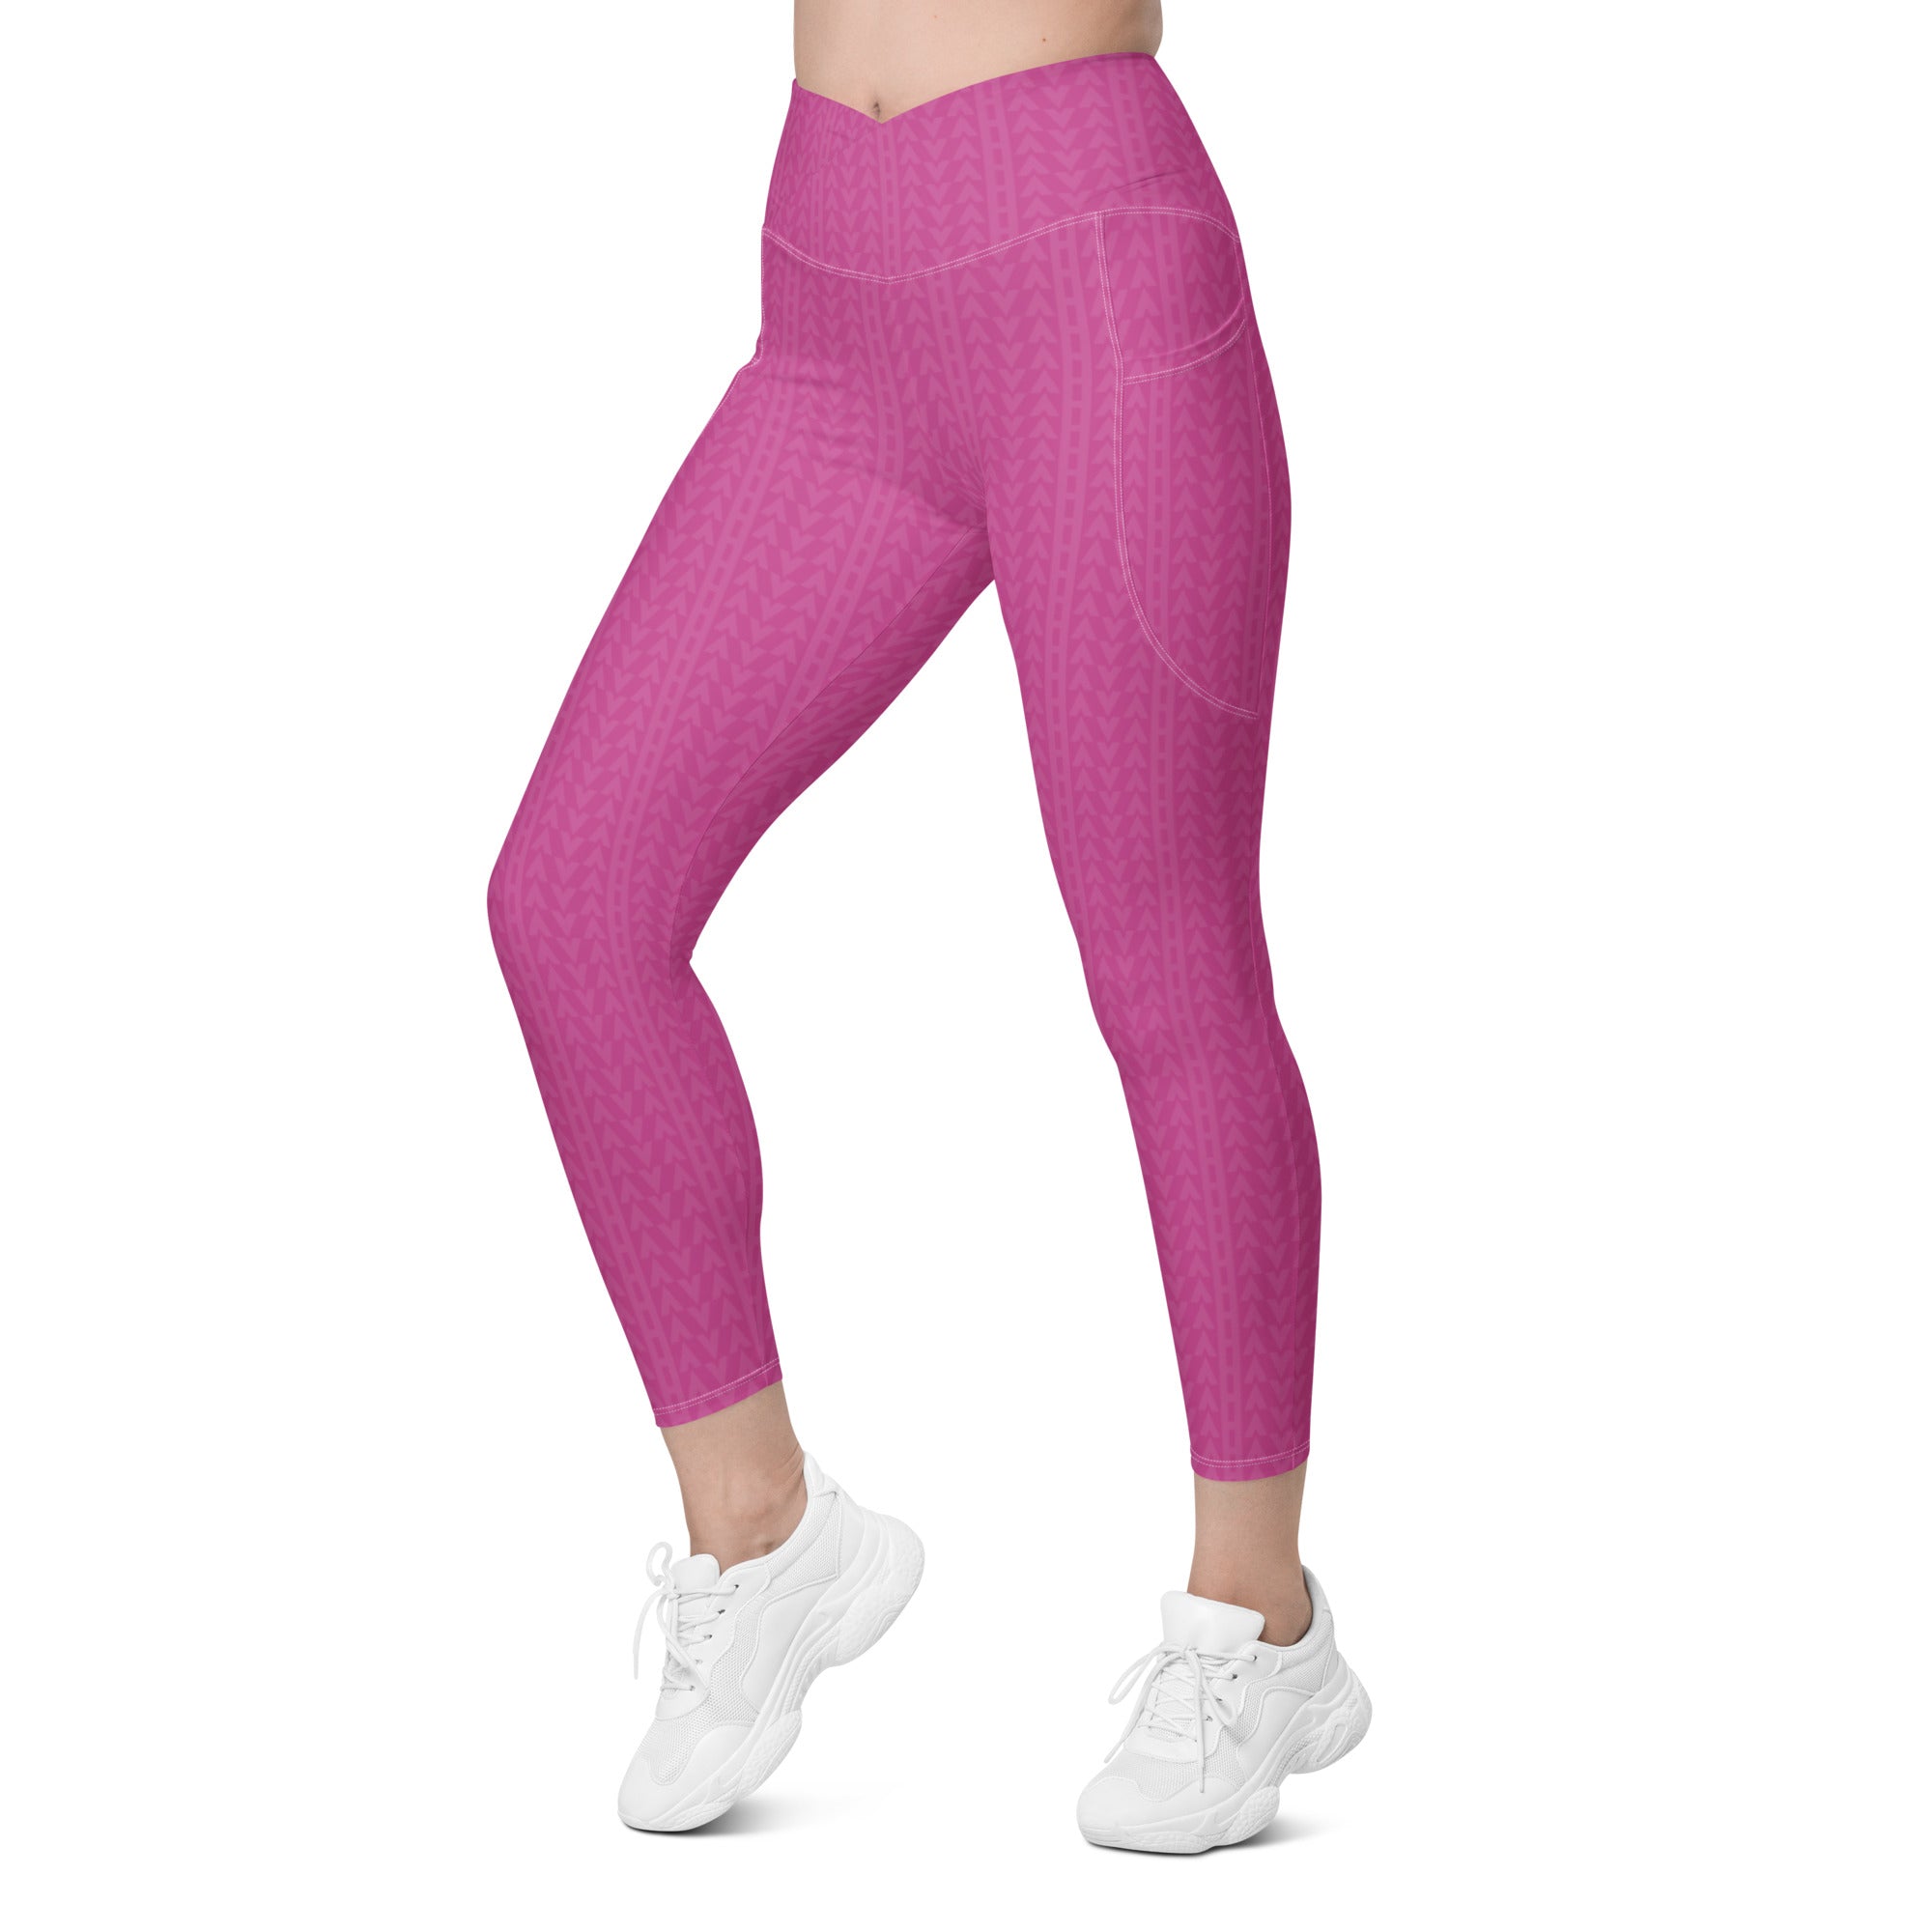 Rose Zing High Waisted Crossover Leggings with Pockets